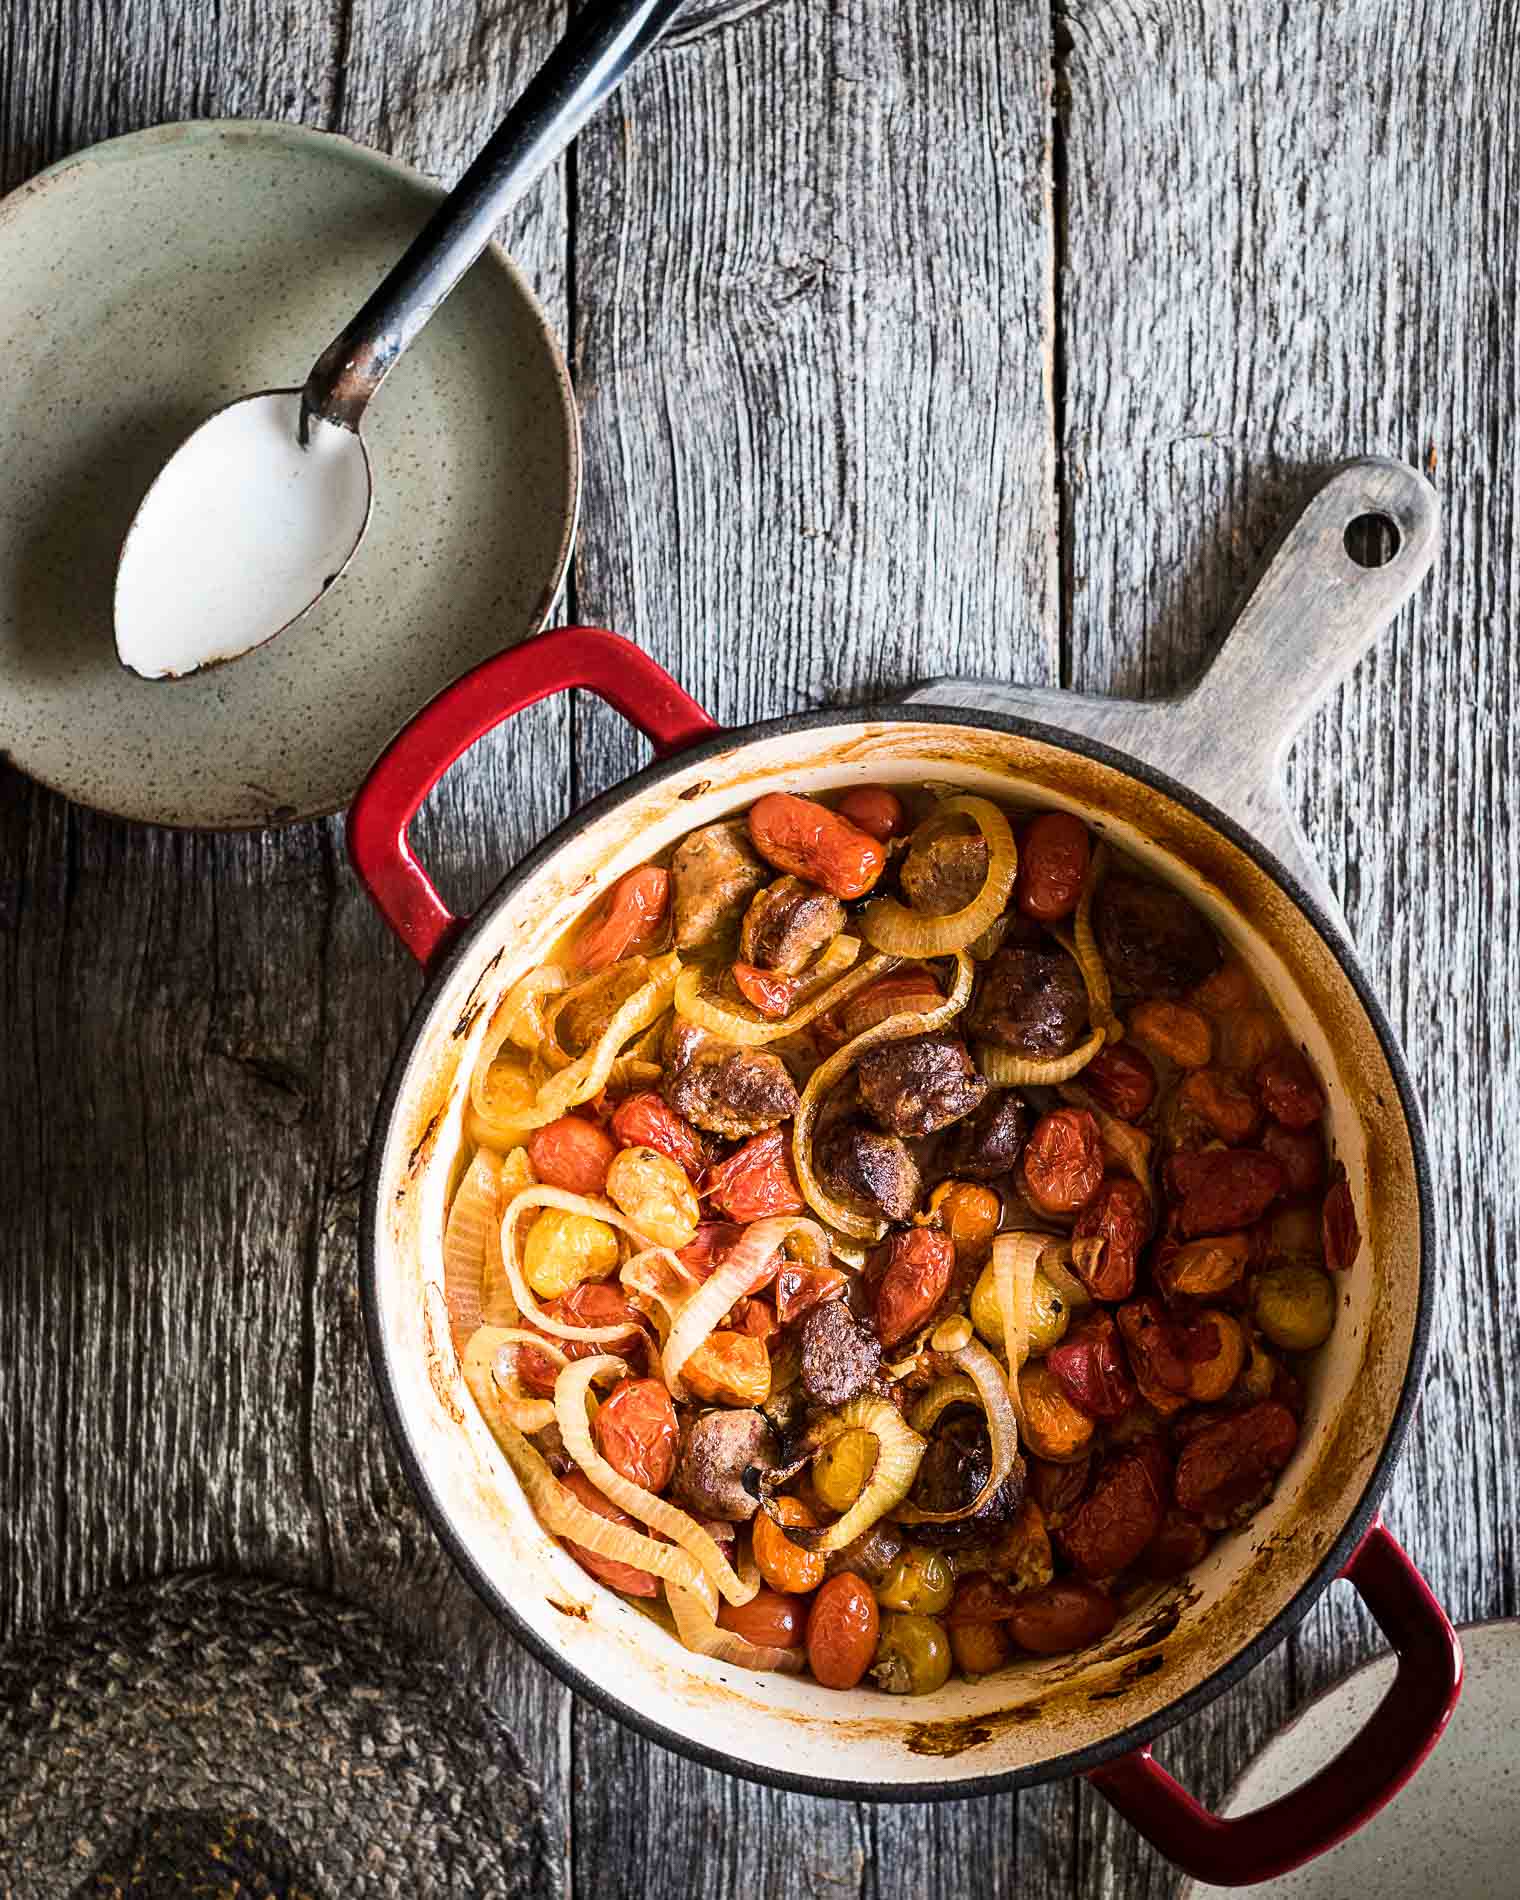 Tomato Pasta Sauce with Italian Sausage, Keeping With the Times, An easy go-to recipe for pasta sauce that takes its time.